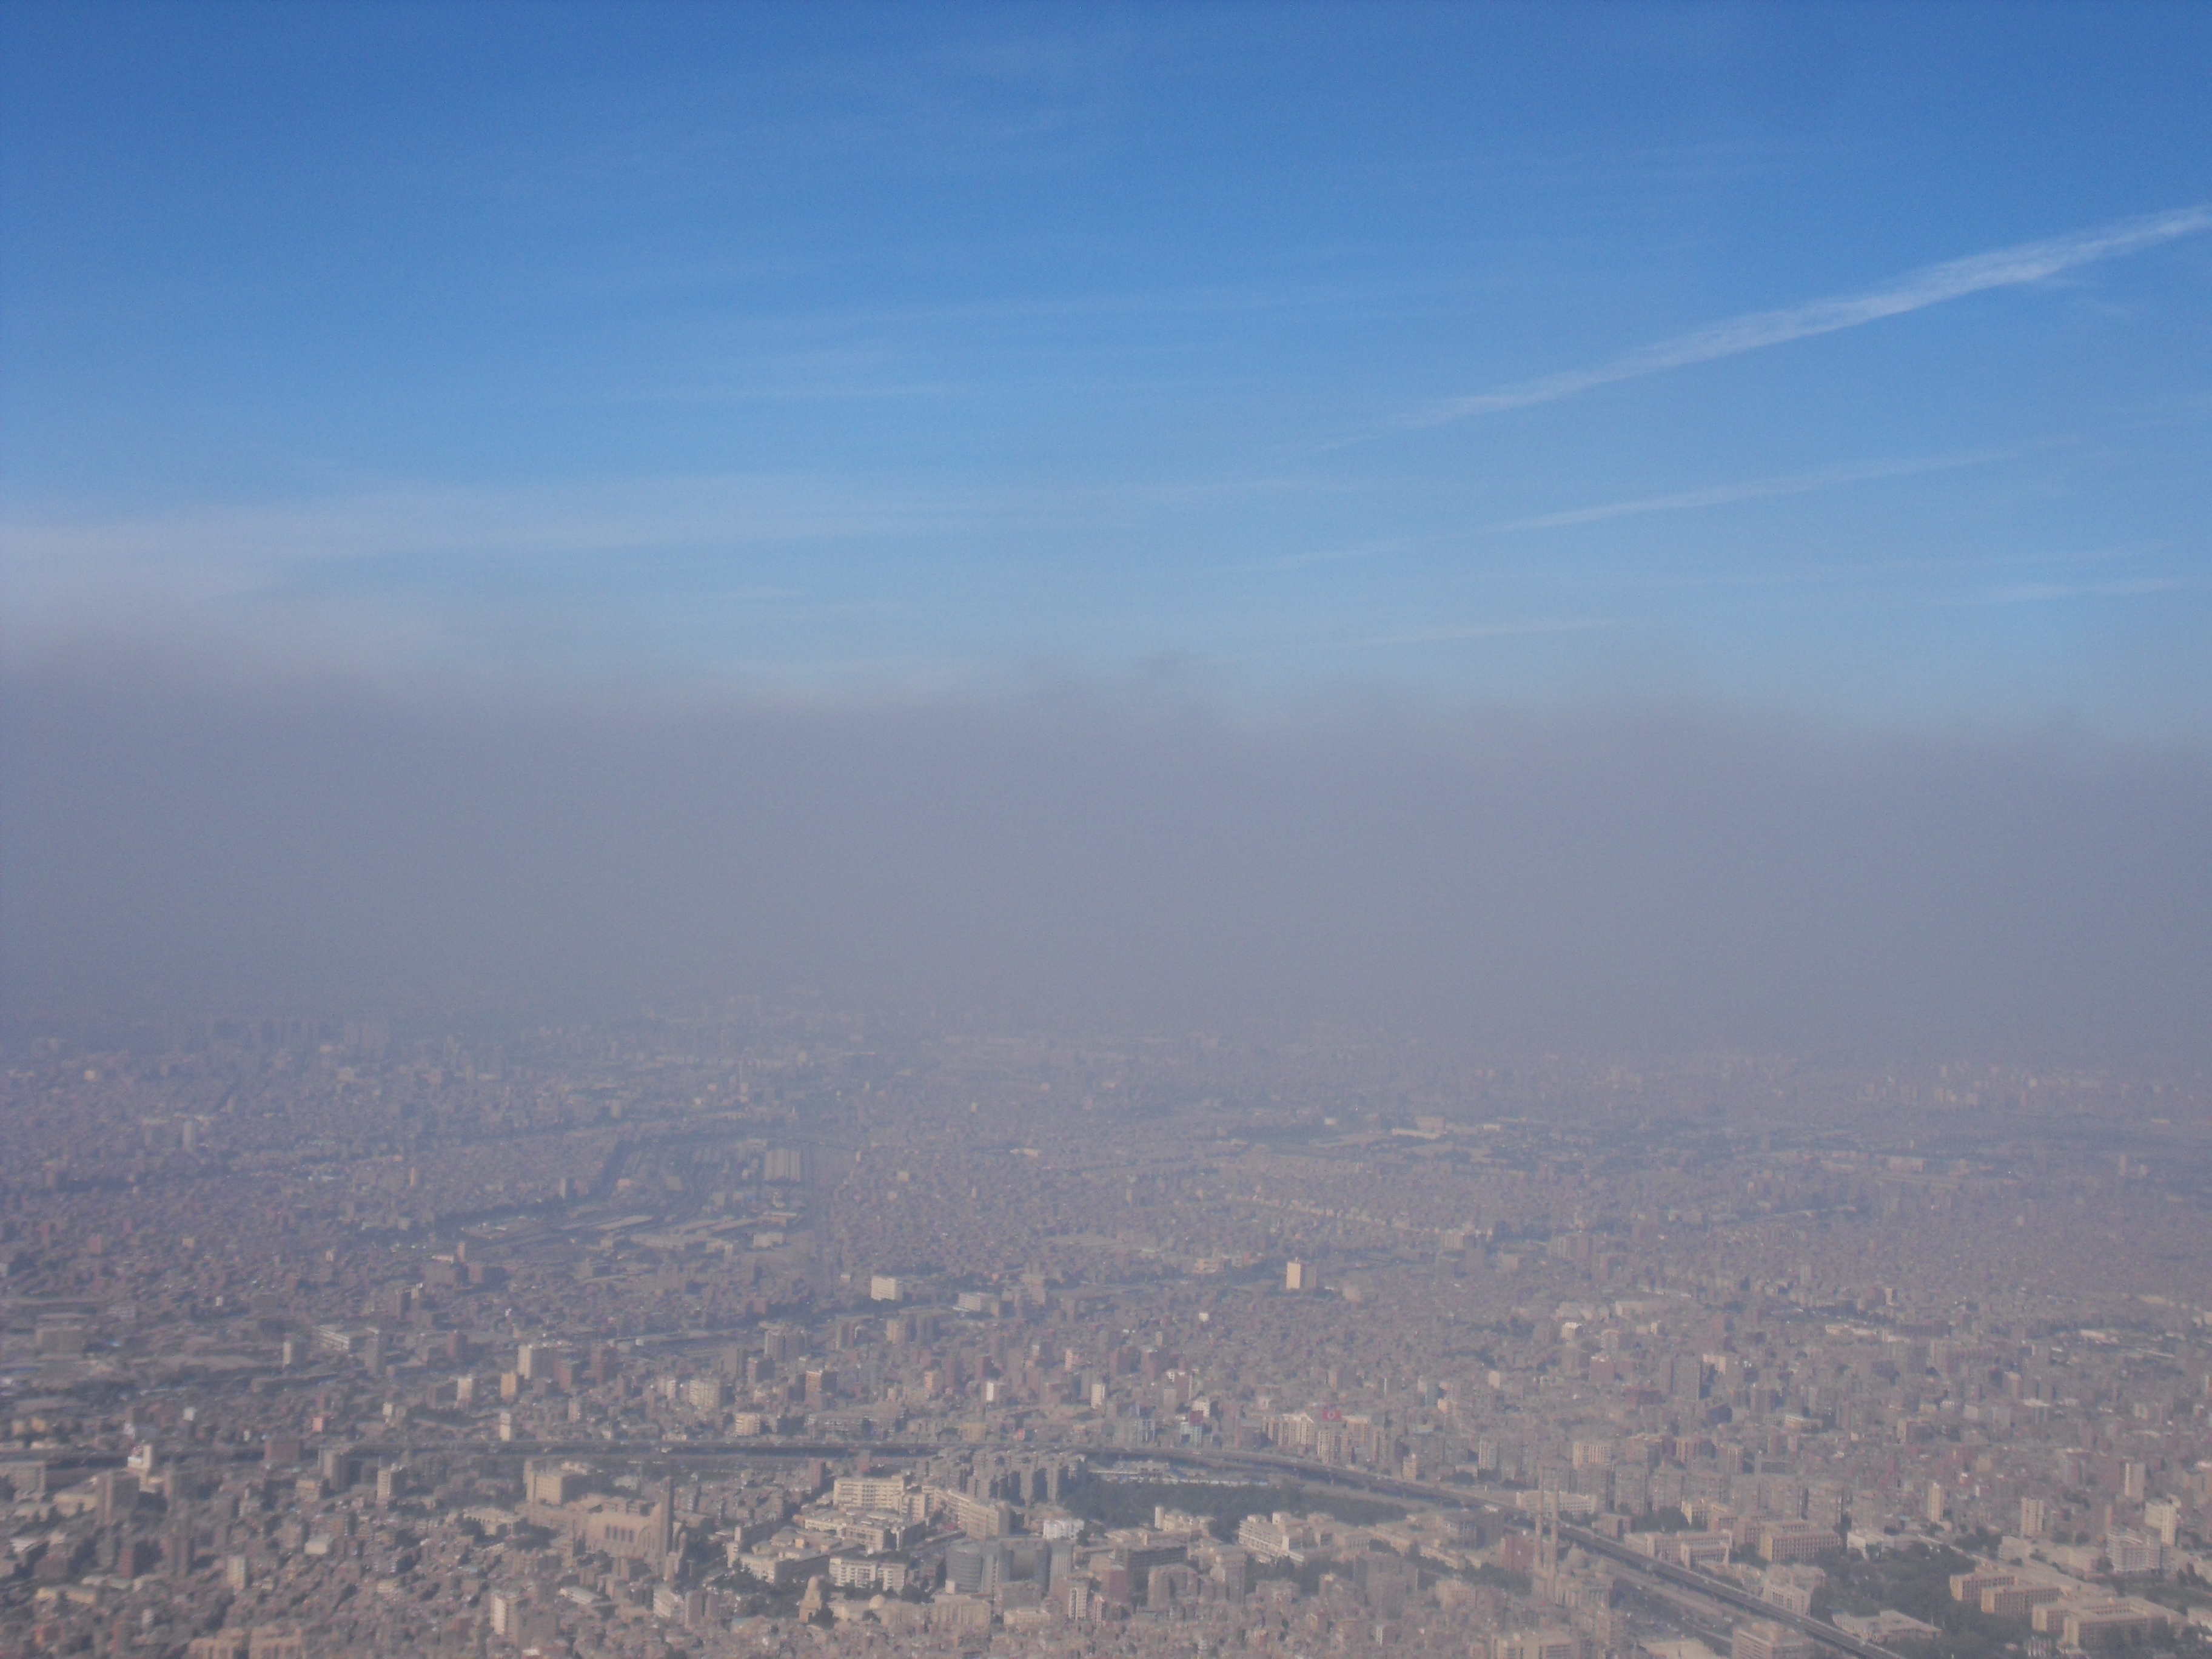 Smog over Cairo as seen from a plane.